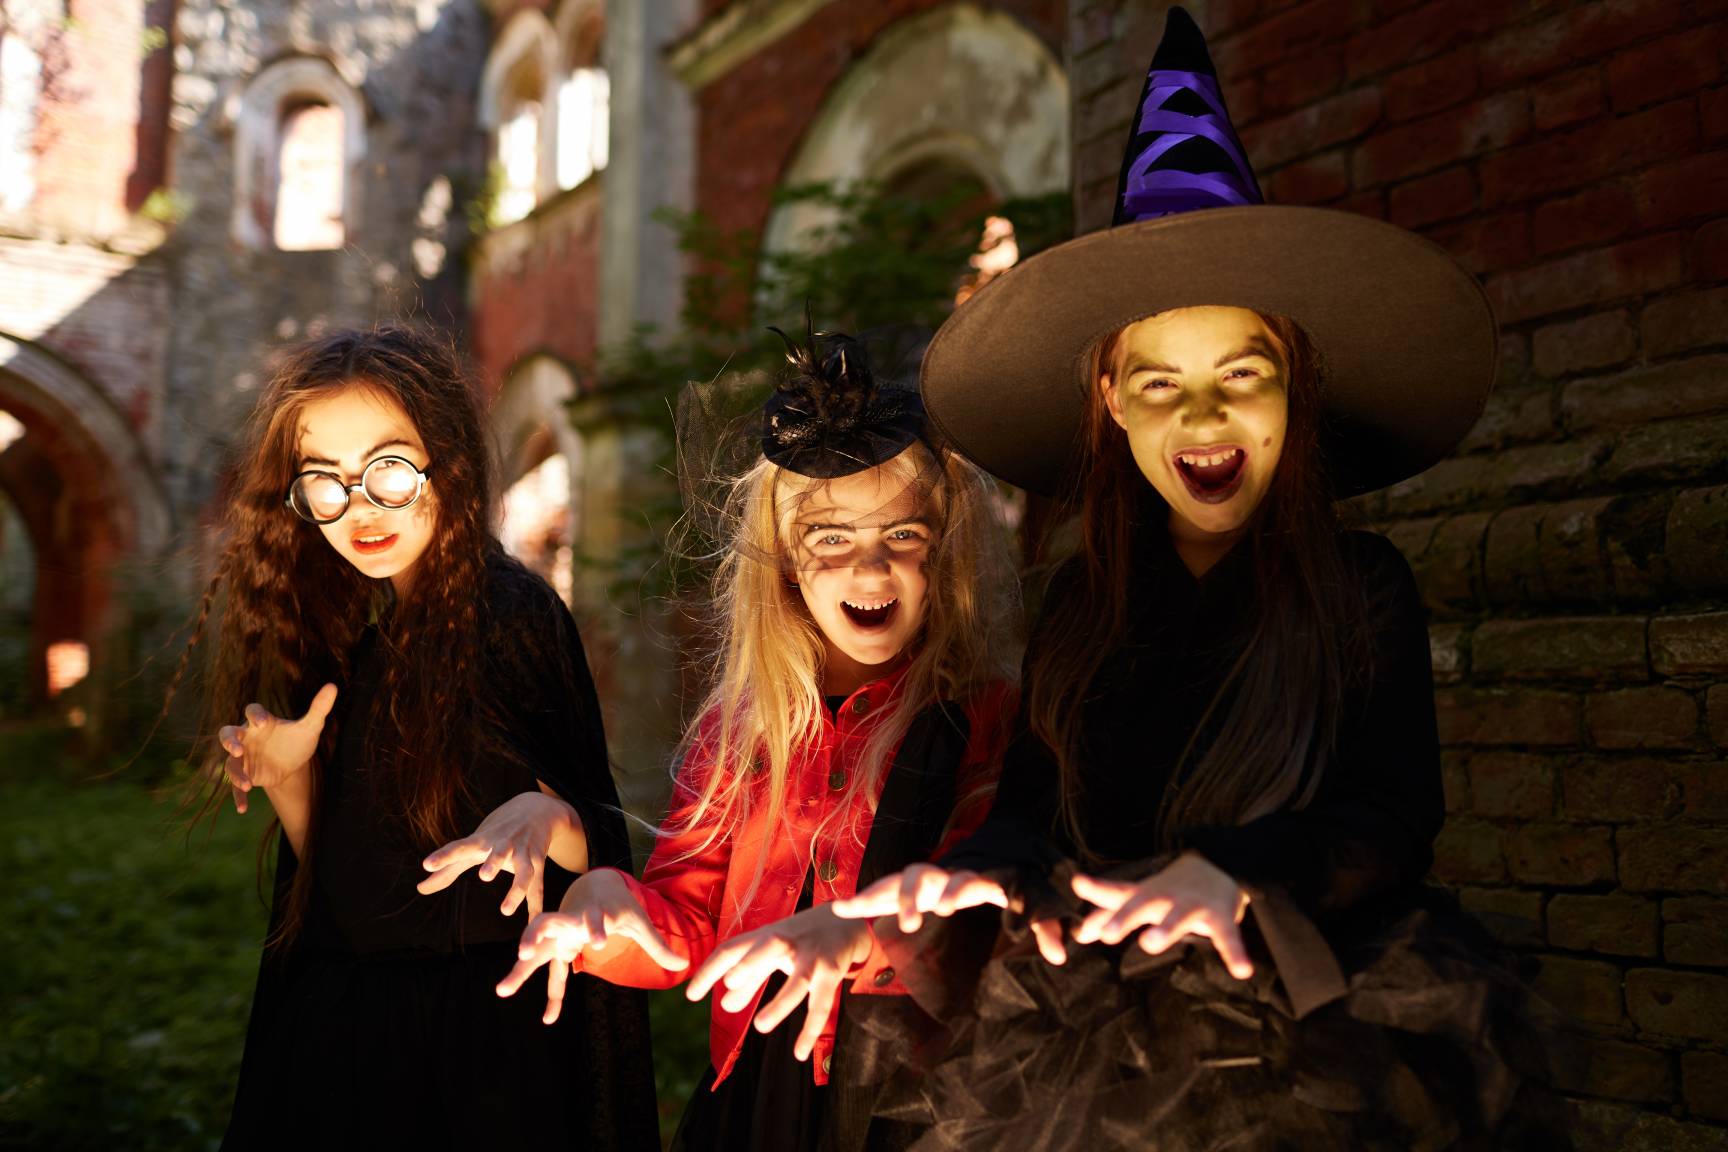 Three girls dressed as witches and pulling scary faces.